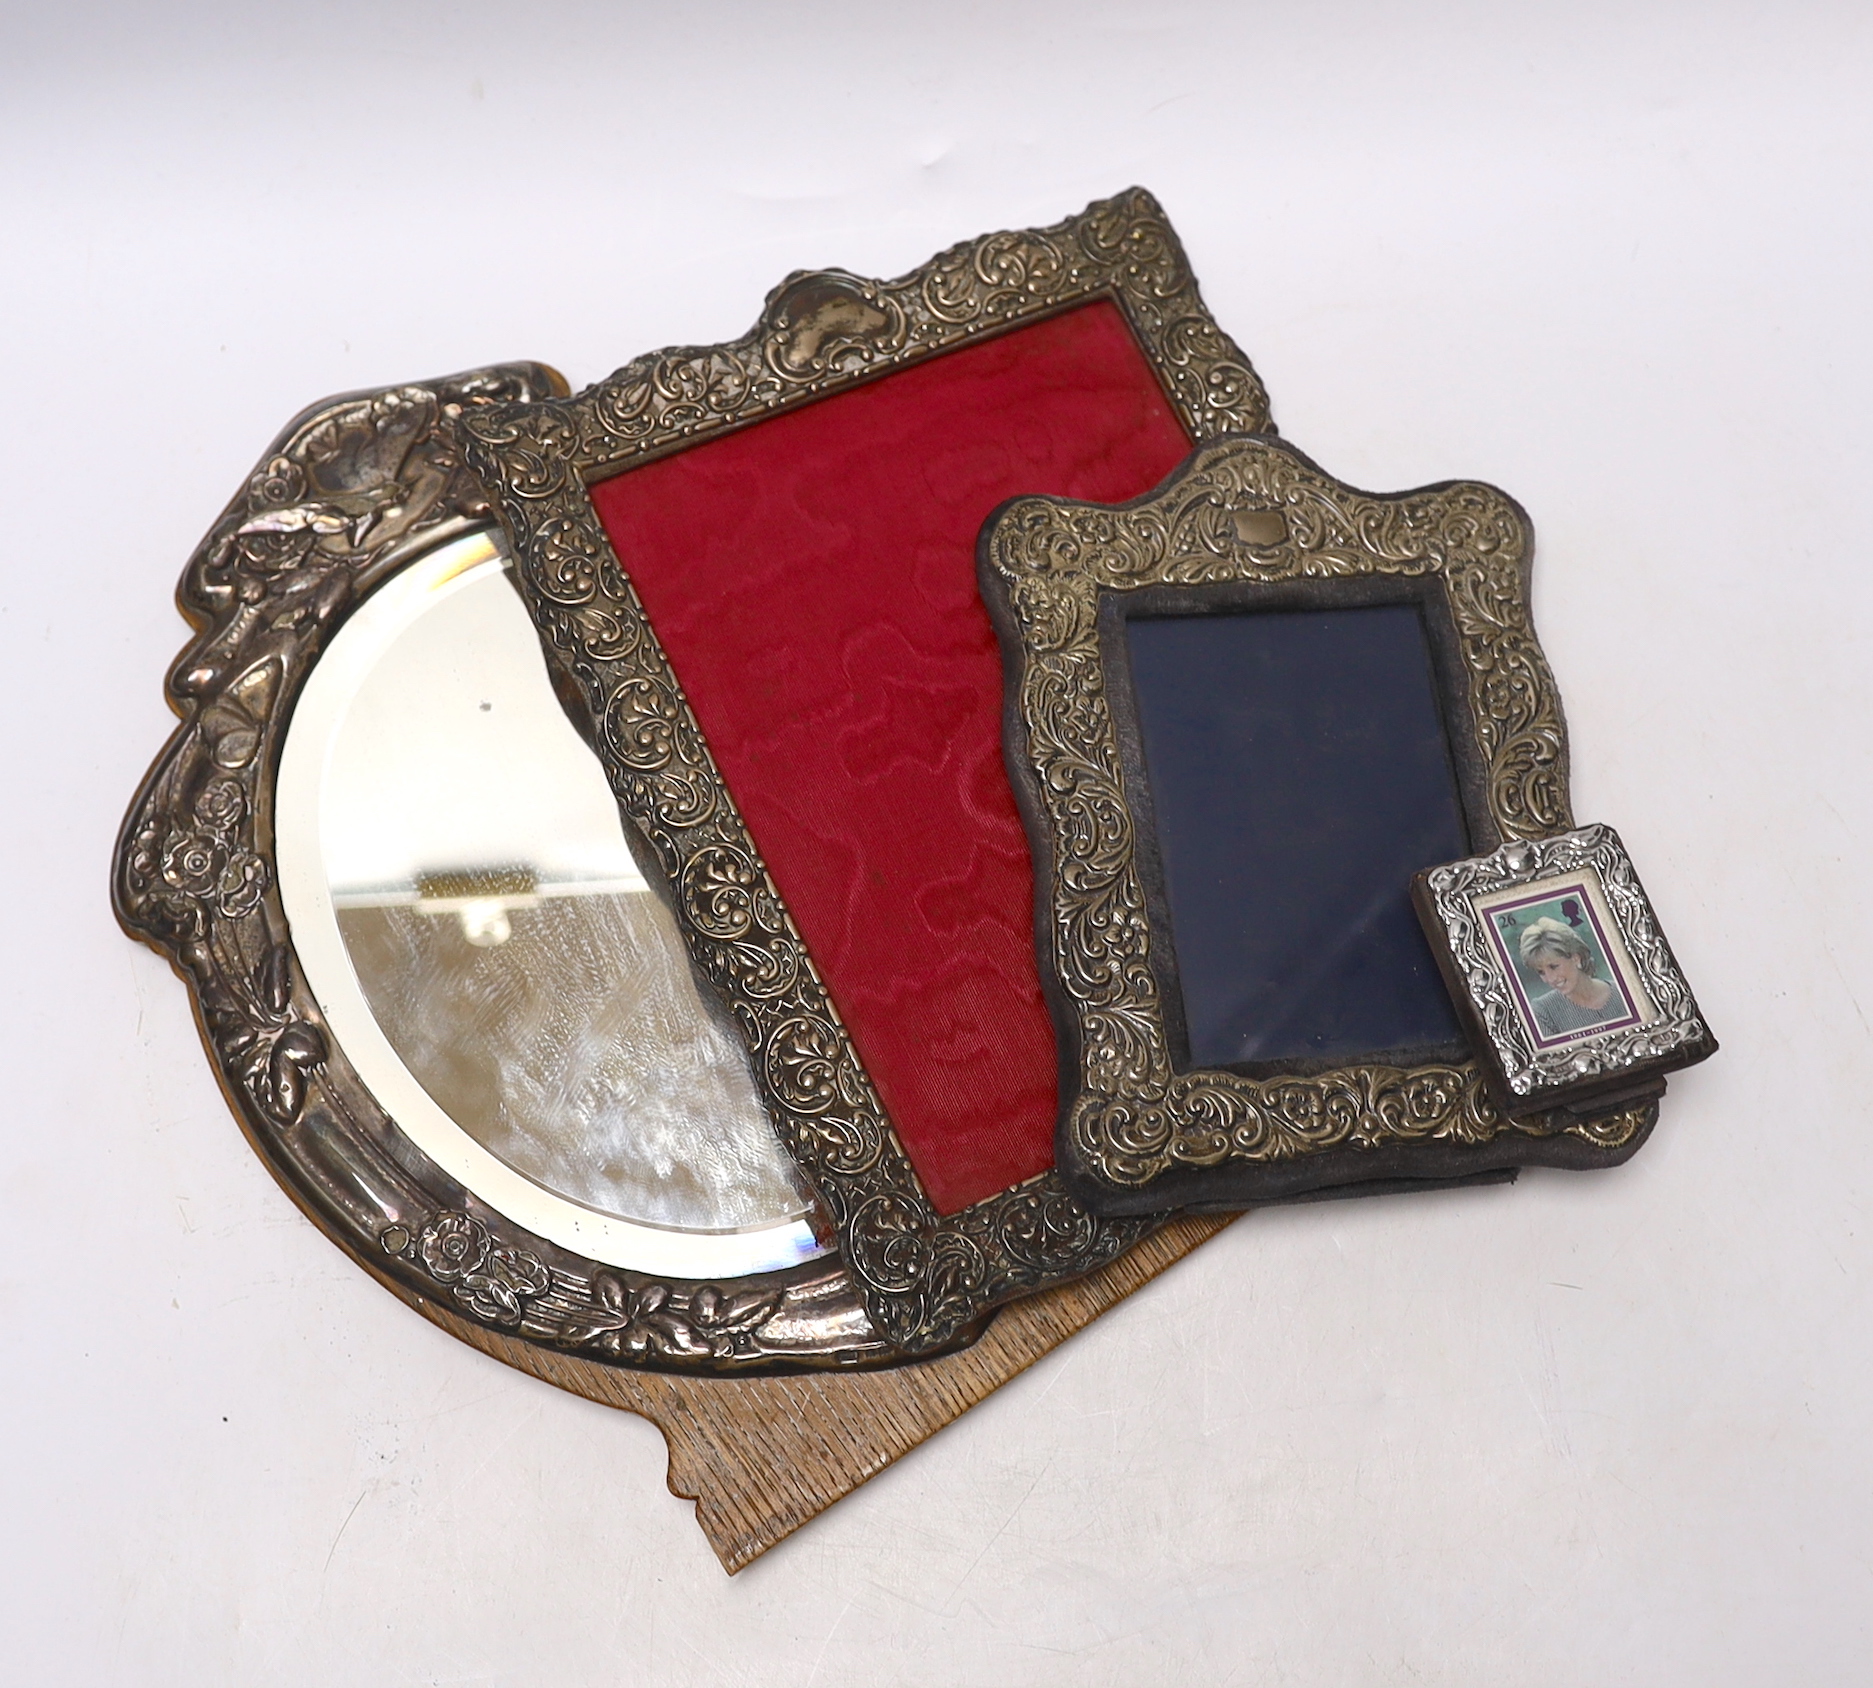 An Edwardian silver mounted wooden easel mirror, Birmingham, 1904, 31.4cm (a.f.), together with three assorted silver mounted photograph frames, earliest Birmingham, 1900.